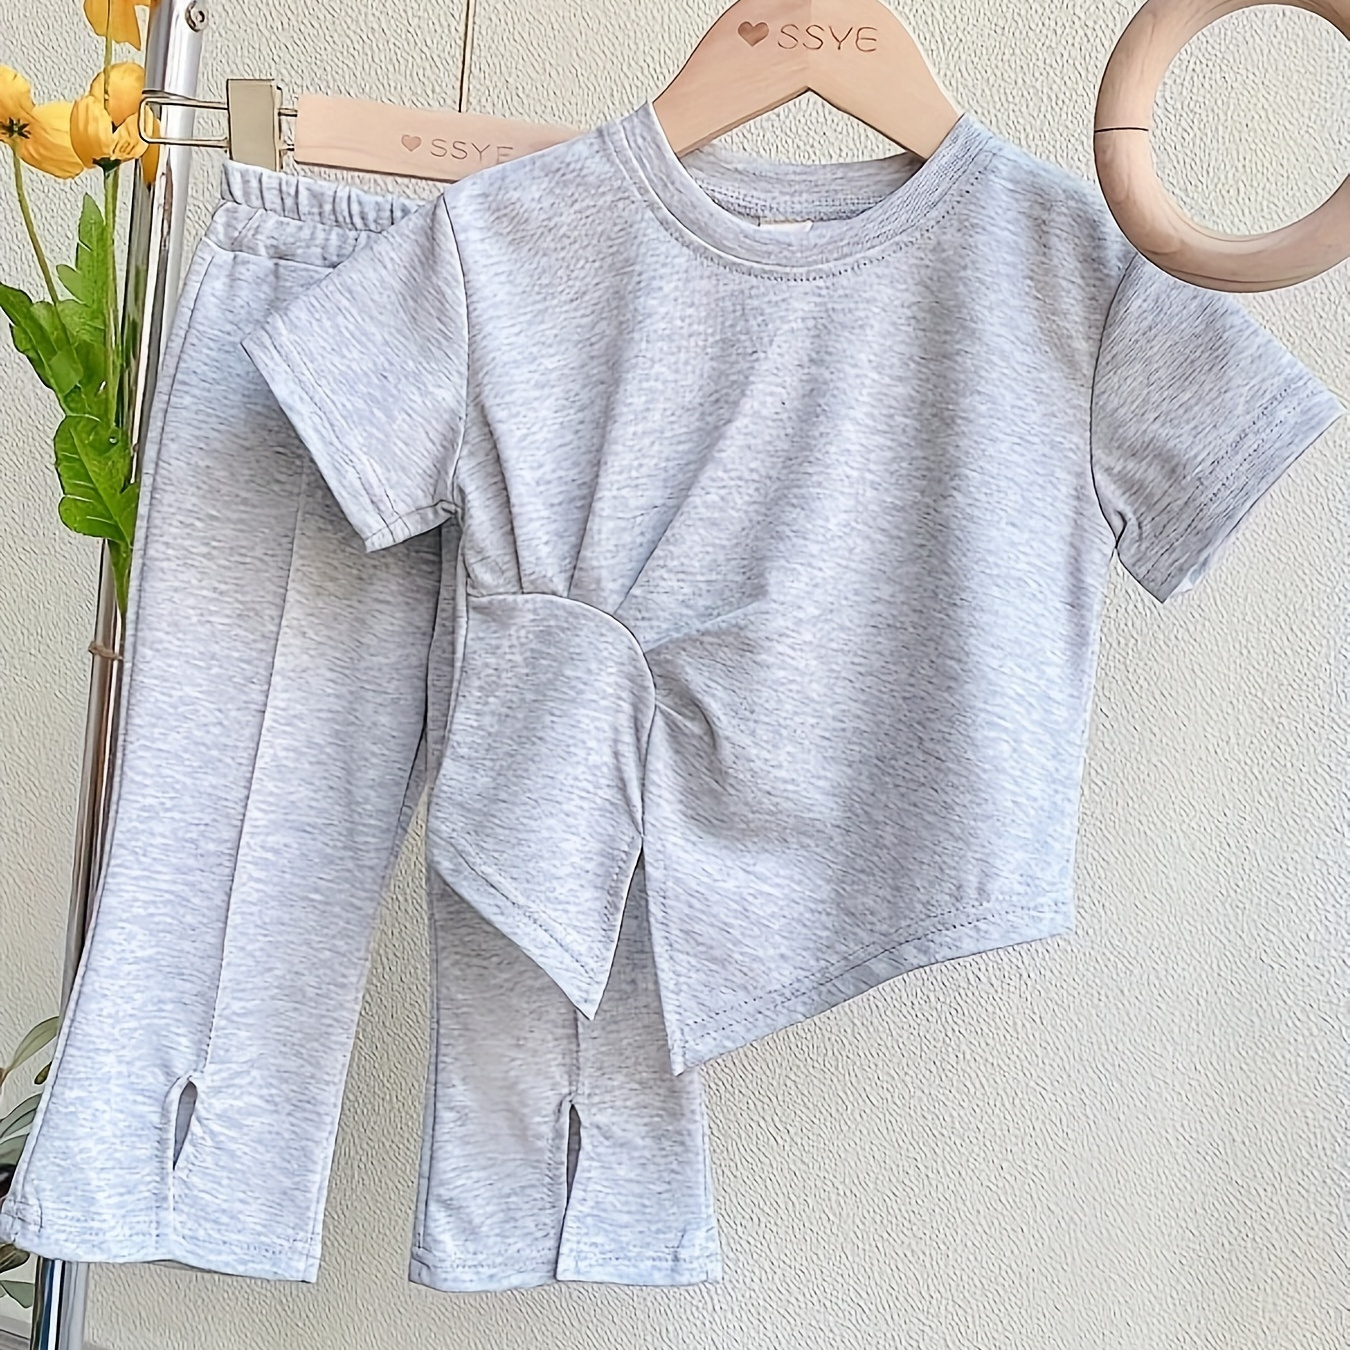 

2pcs, Girls Comfy Casual 95% Cotton Outfits, Short Sleeve T-shirt + Split Side Flare Pants Set For Summer Outdoor